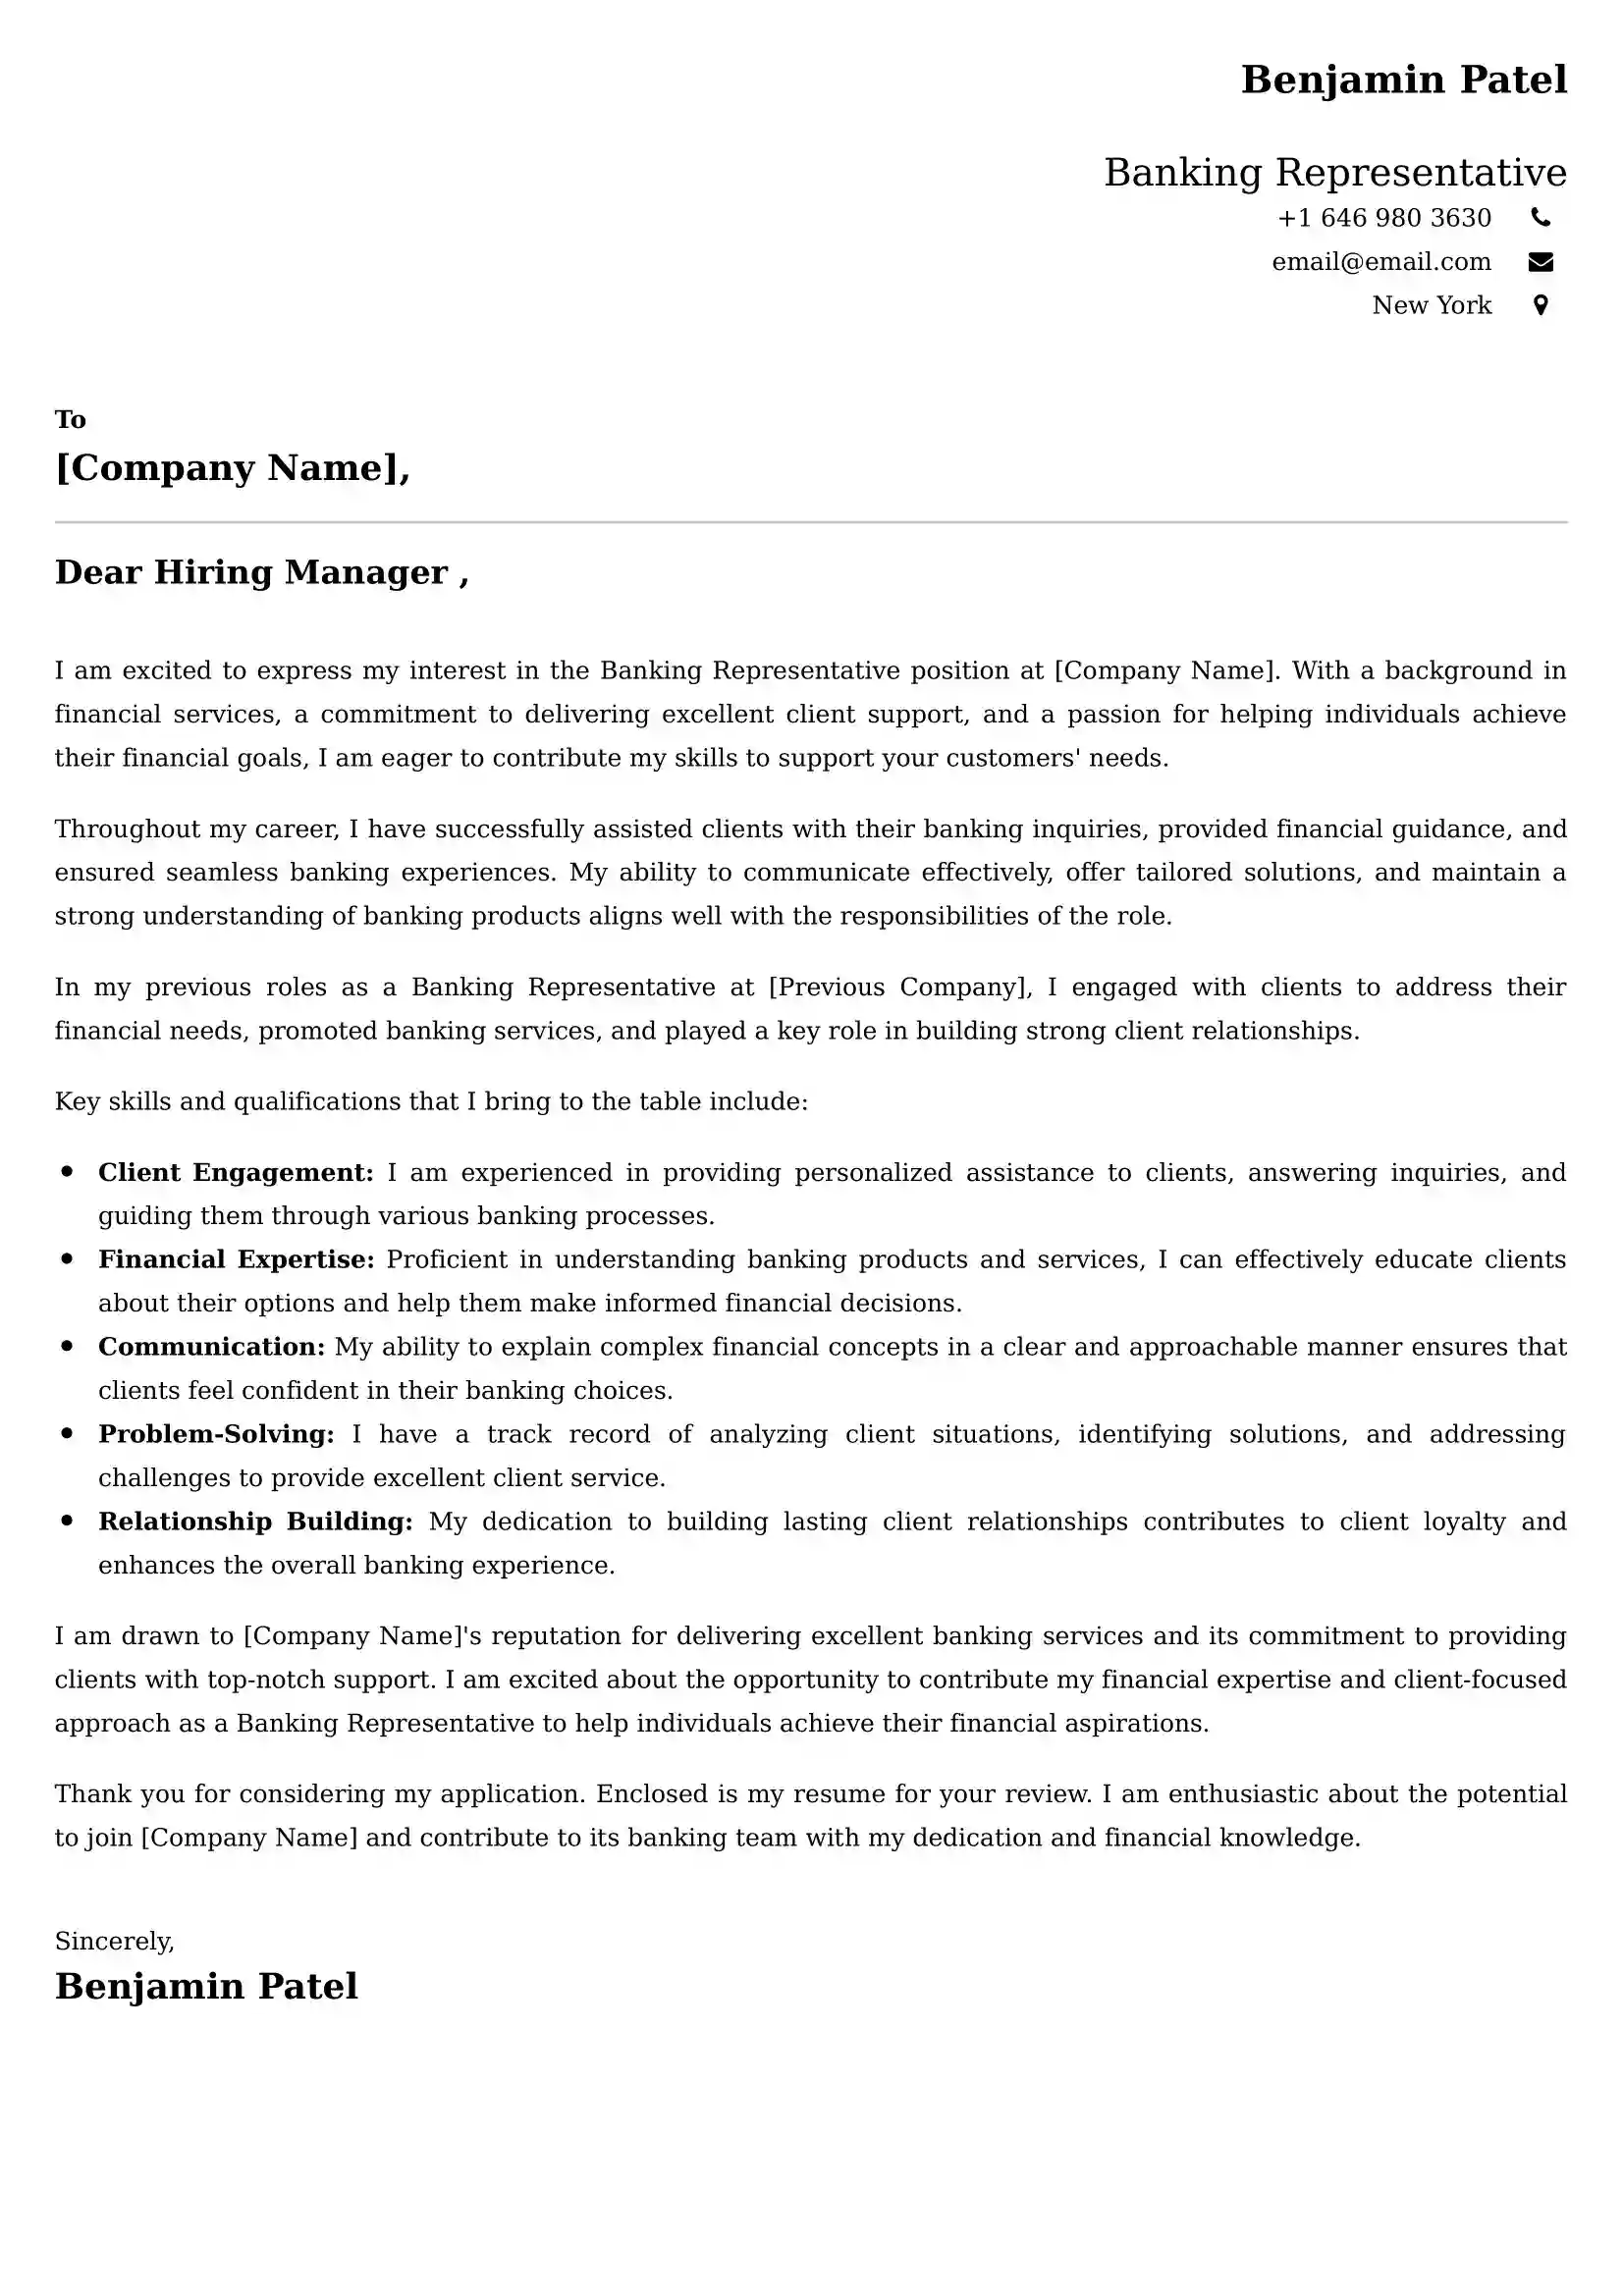 Banking Representative Cover Letter Examples - Latest UK Format